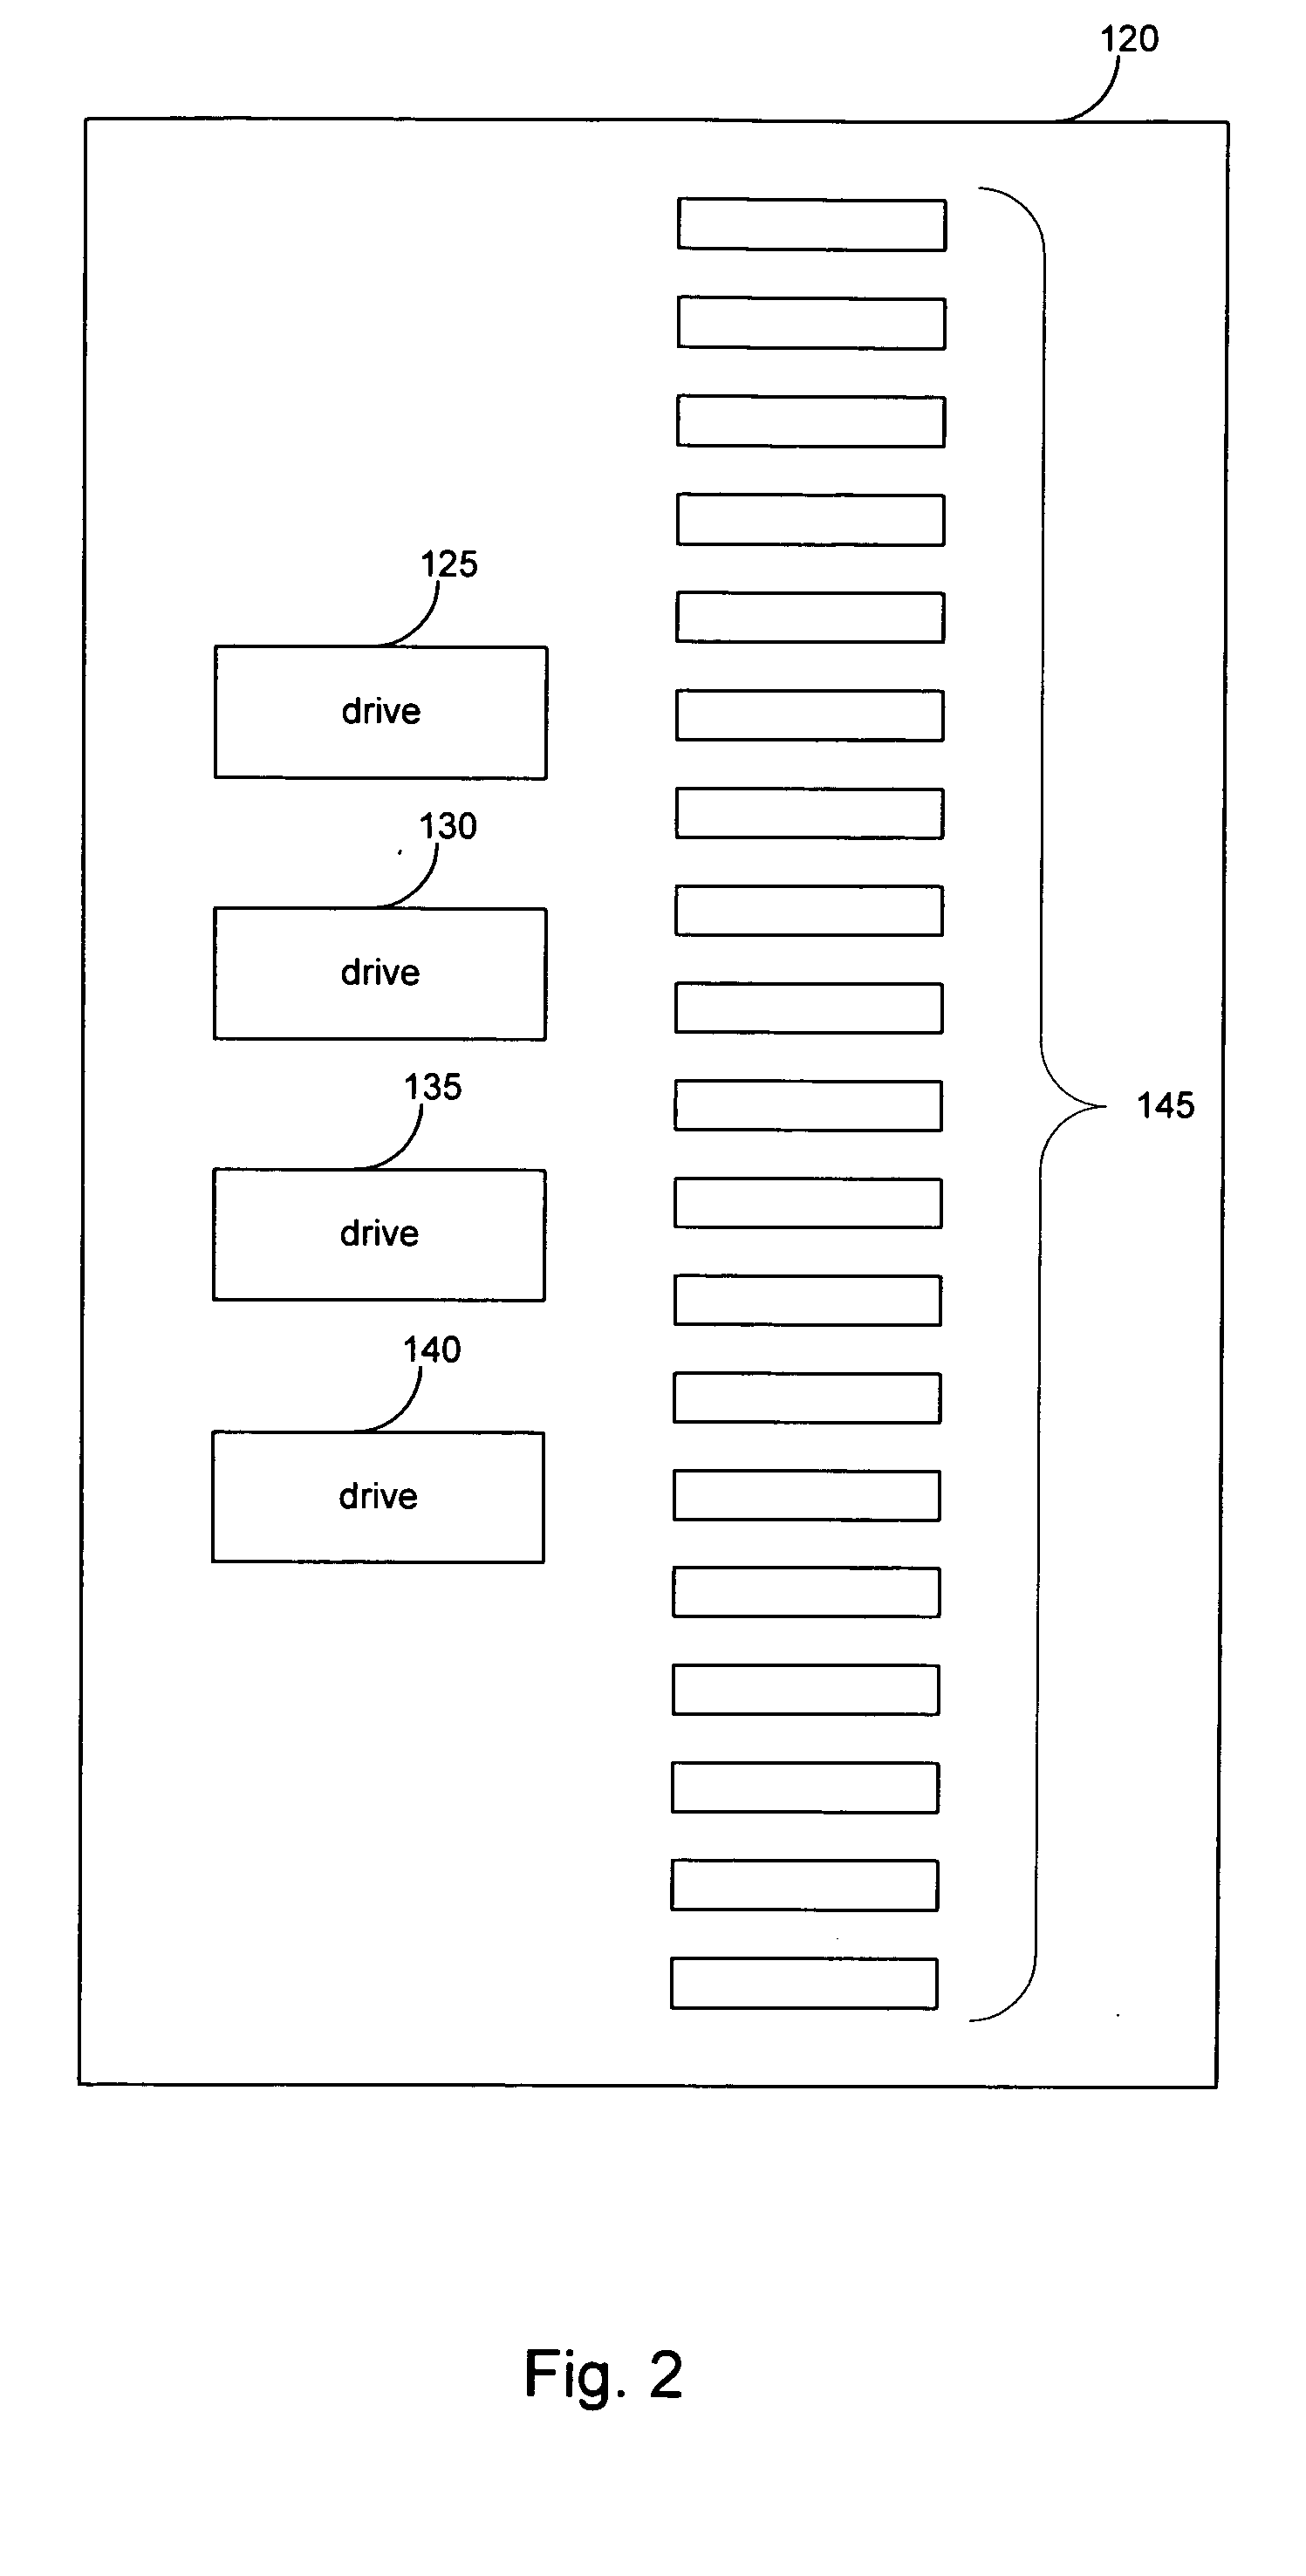 System and method for dynamically performing storage operations in a computer network